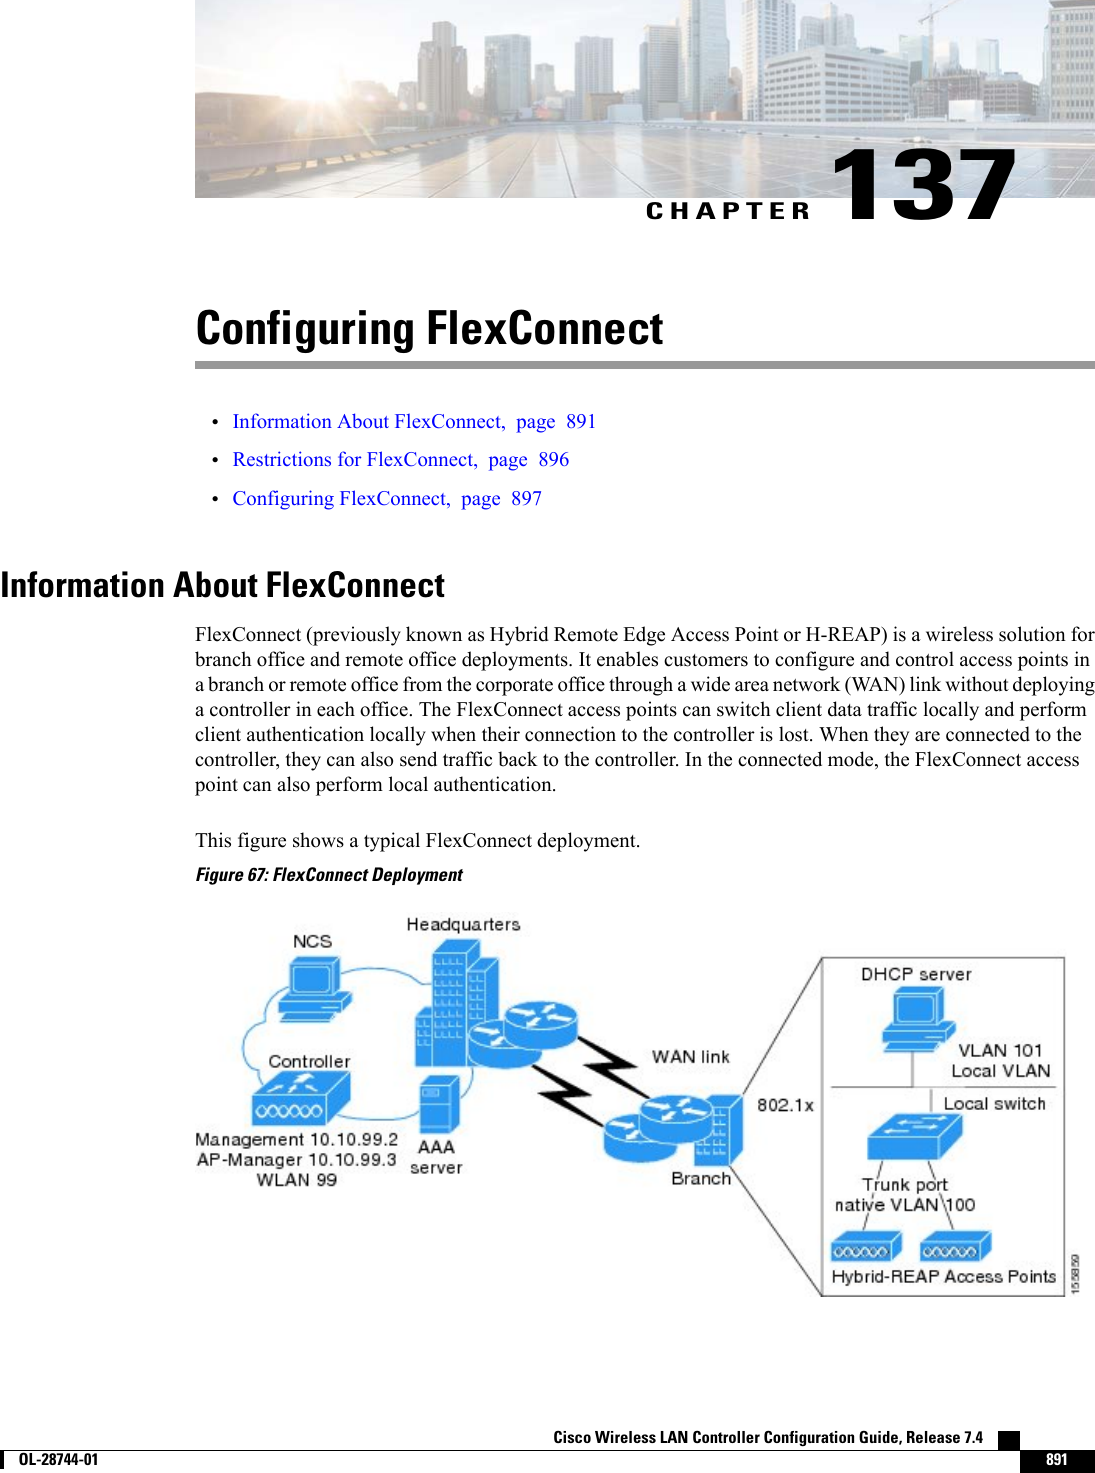 CHAPTER 137Configuring FlexConnect•Information About FlexConnect, page 891•Restrictions for FlexConnect, page 896•Configuring FlexConnect, page 897Information About FlexConnectFlexConnect (previously known as Hybrid Remote Edge Access Point or H-REAP) is a wireless solution forbranch office and remote office deployments. It enables customers to configure and control access points ina branch or remote office from the corporate office through a wide area network (WAN) link without deployinga controller in each office. The FlexConnect access points can switch client data traffic locally and performclient authentication locally when their connection to the controller is lost. When they are connected to thecontroller, they can also send traffic back to the controller. In the connected mode, the FlexConnect accesspoint can also perform local authentication.This figure shows a typical FlexConnect deployment.Figure 67: FlexConnect DeploymentCisco Wireless LAN Controller Configuration Guide, Release 7.4        OL-28744-01 891